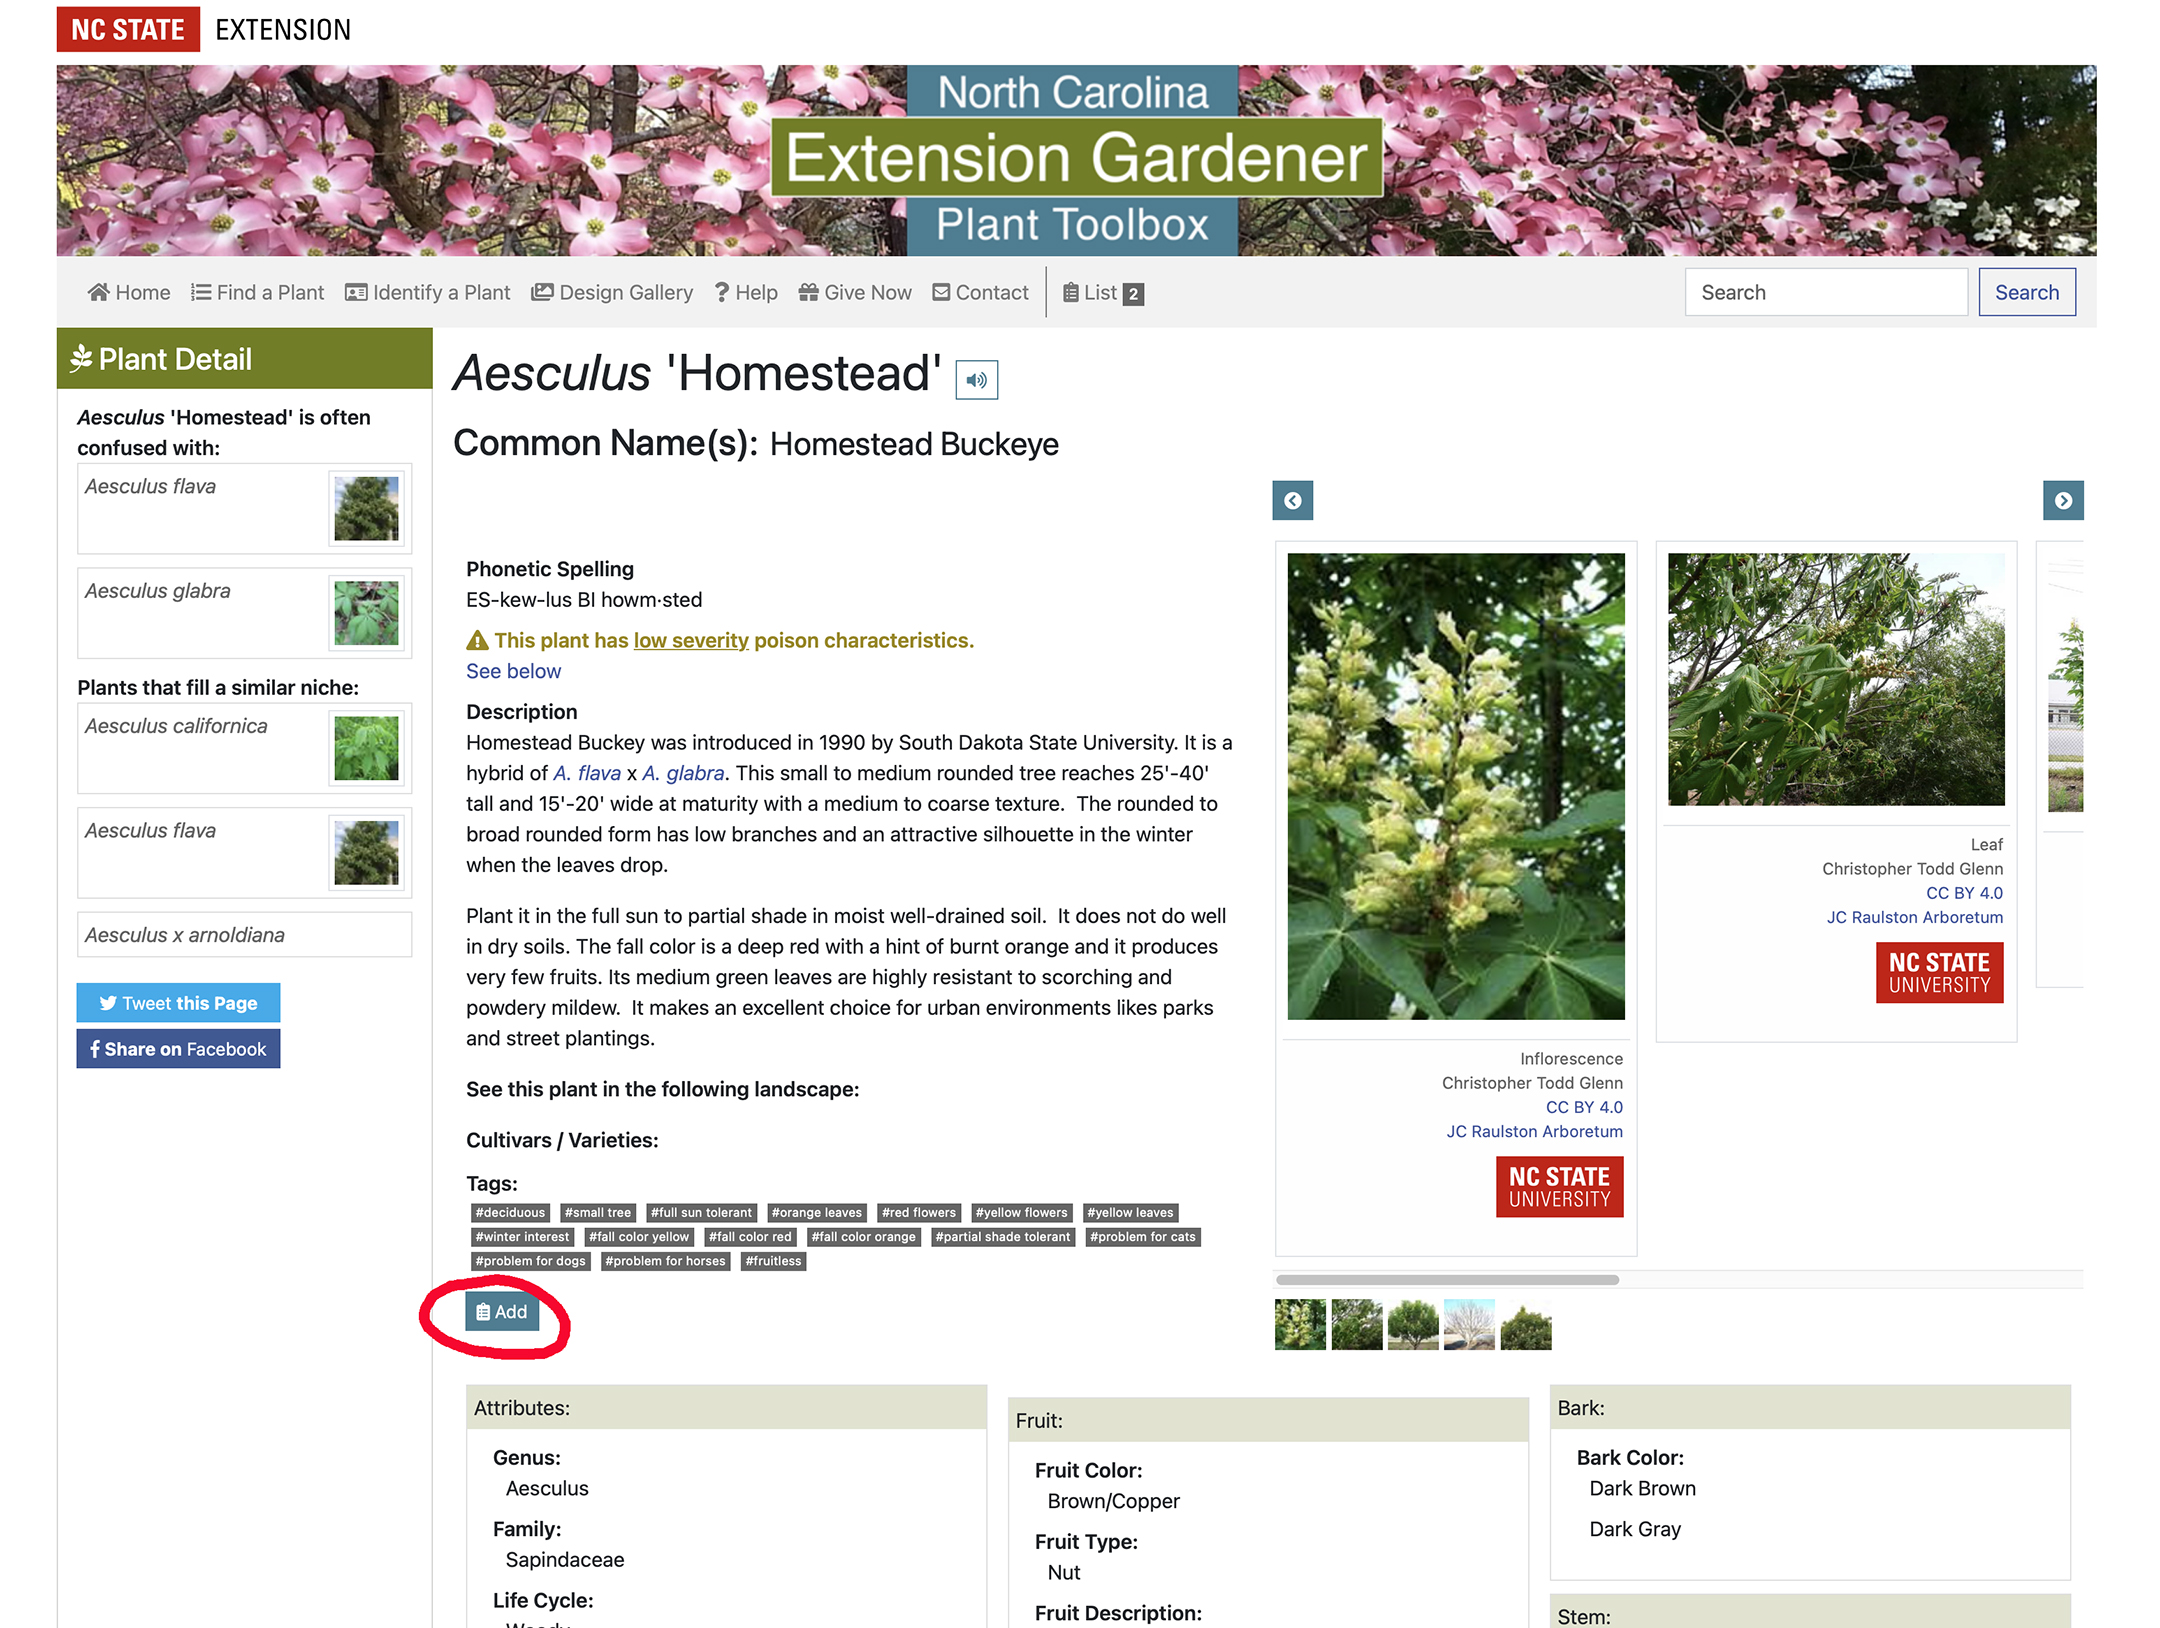 Page view for Aesculus 'Homestead' with "Add" button circled in red.